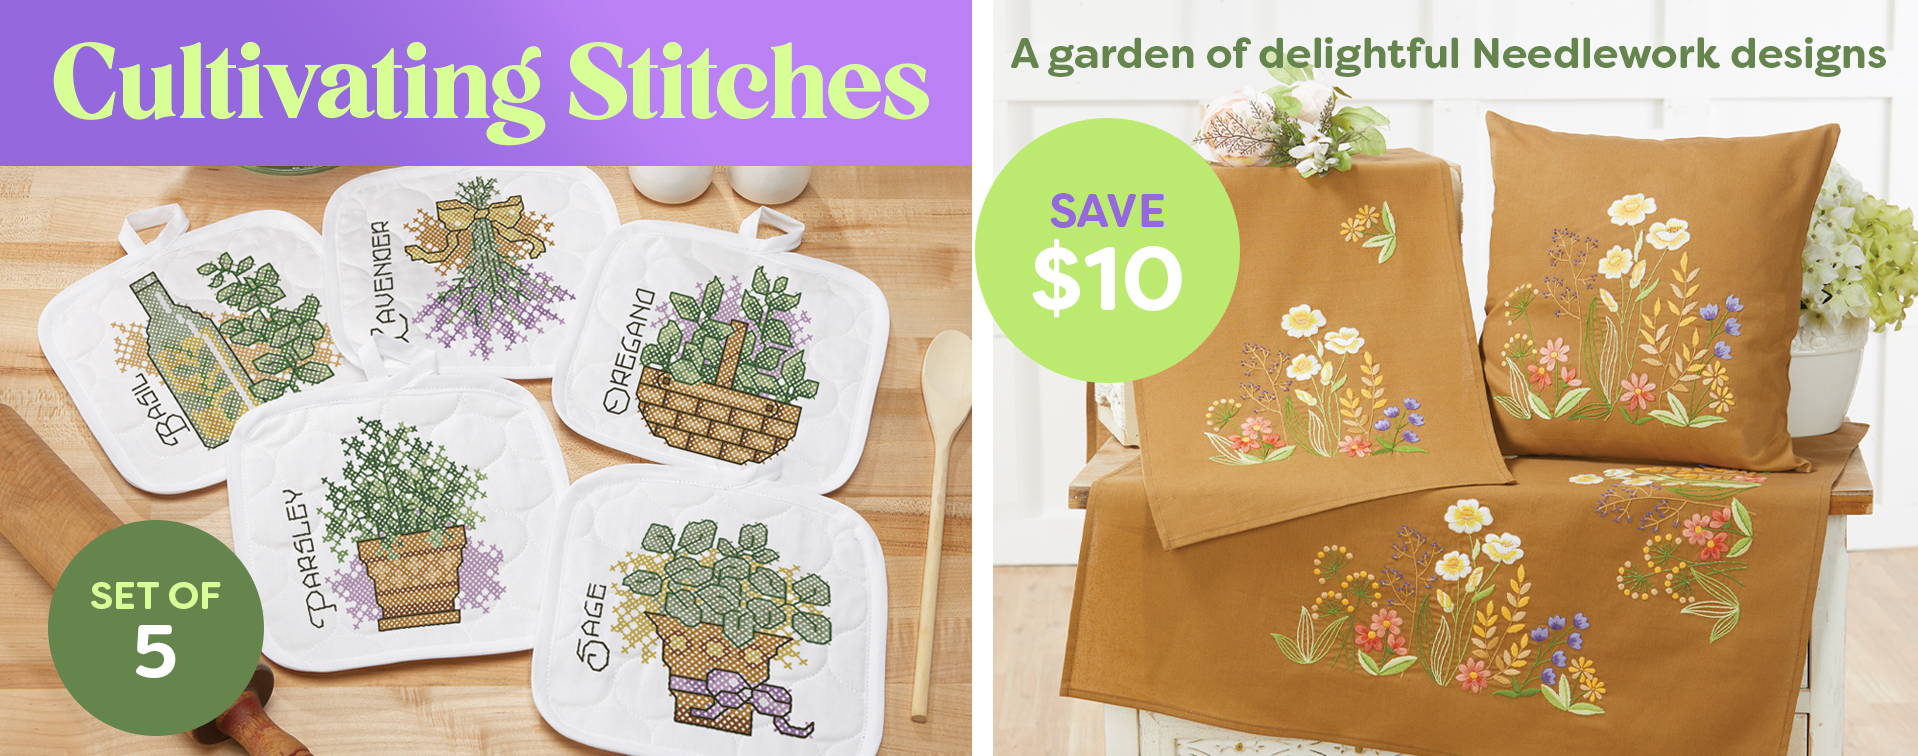 Cultivating Stitches with Savings. Save $10 on Needlework Designs. Images: Needlework Sets.